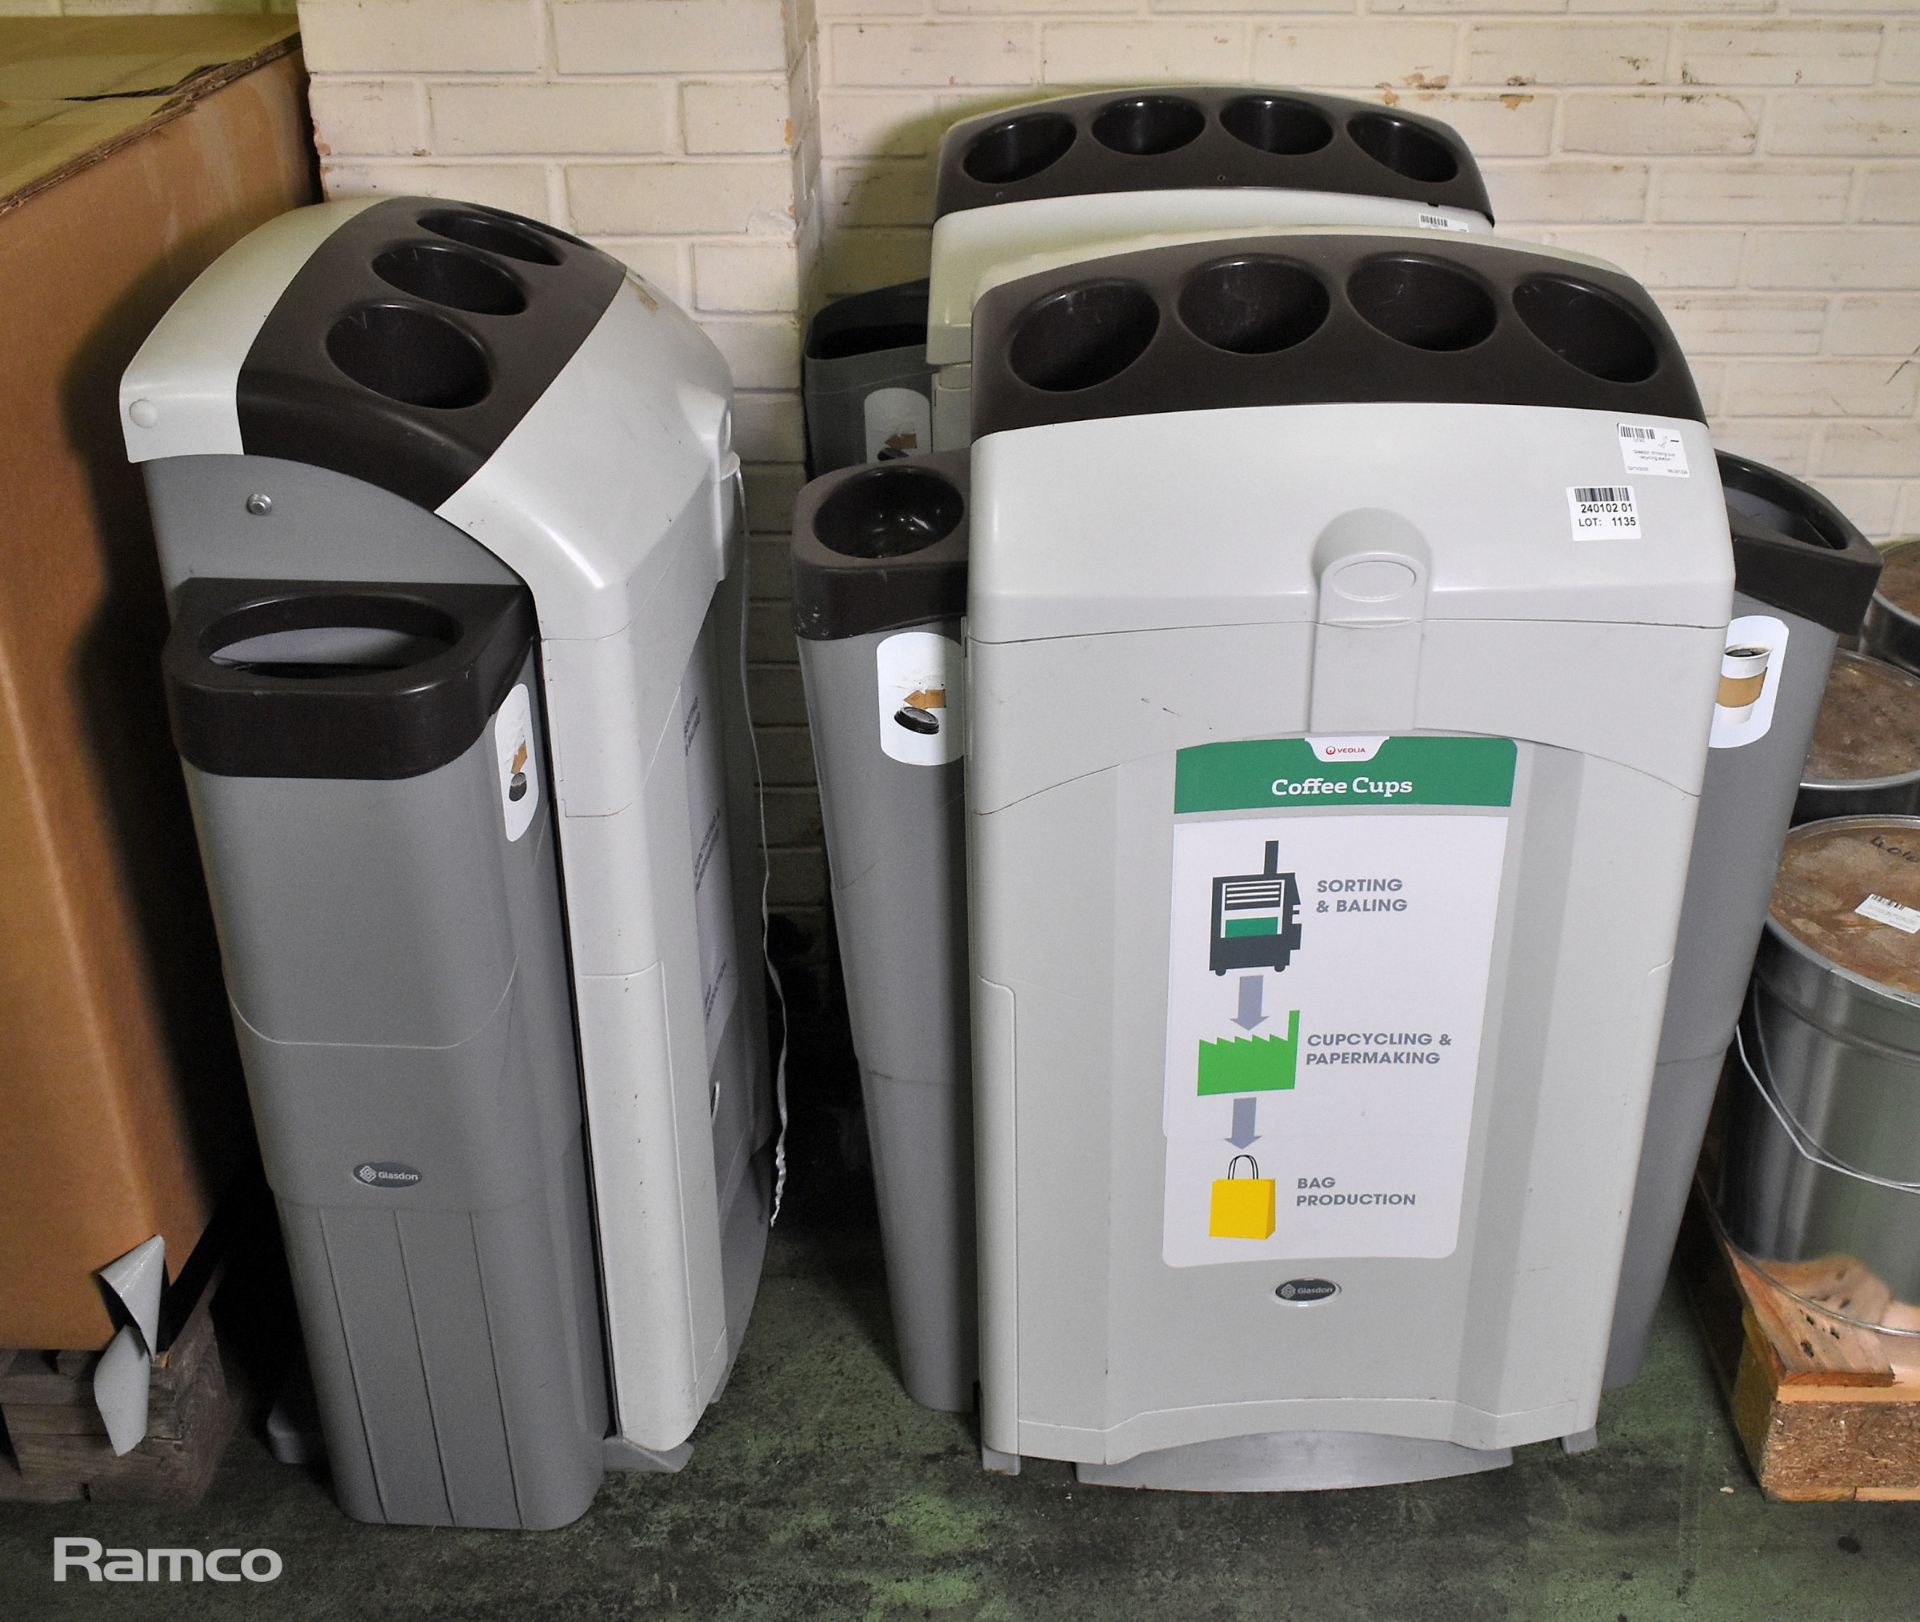 3x Glasdon drinking cup recycling stations